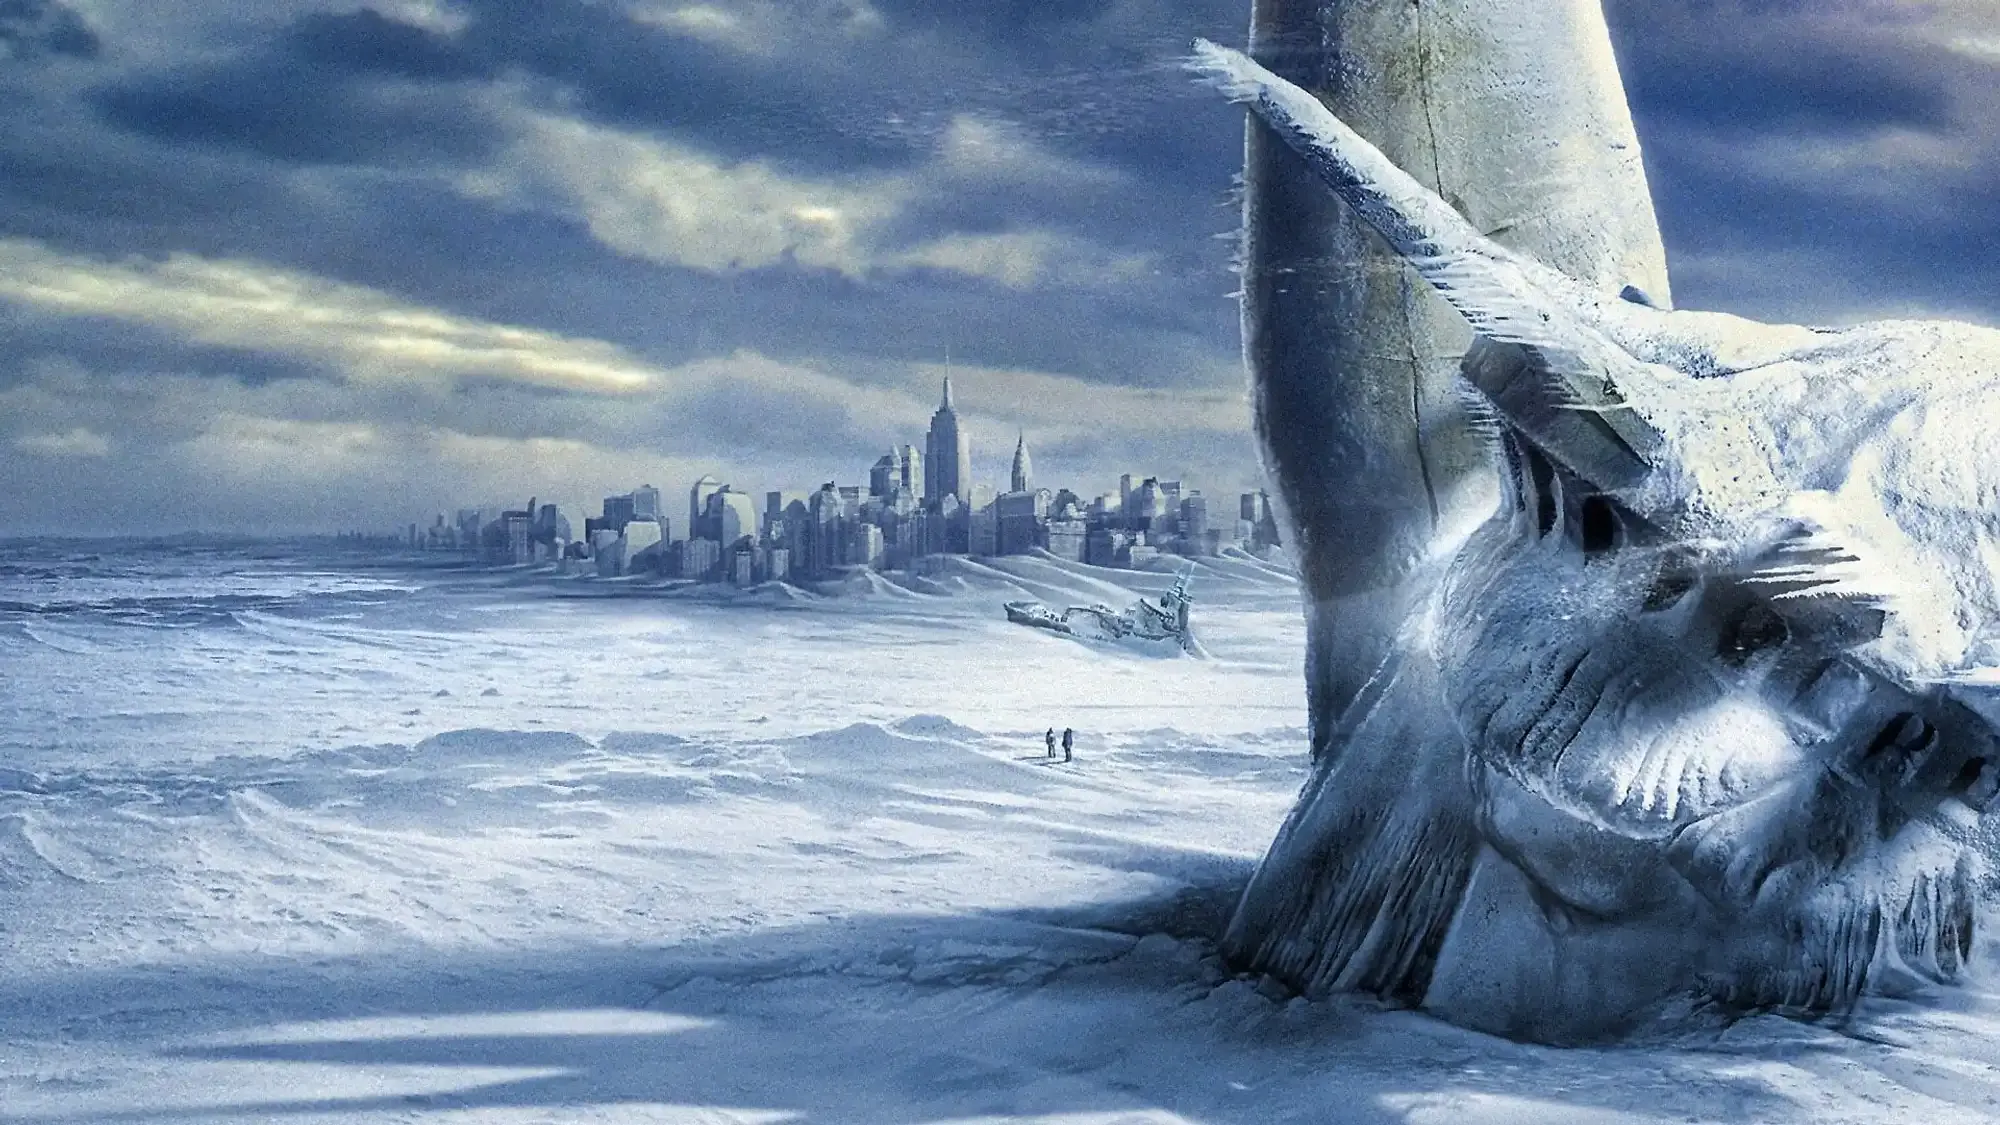 The Day After Tomorrow movie review